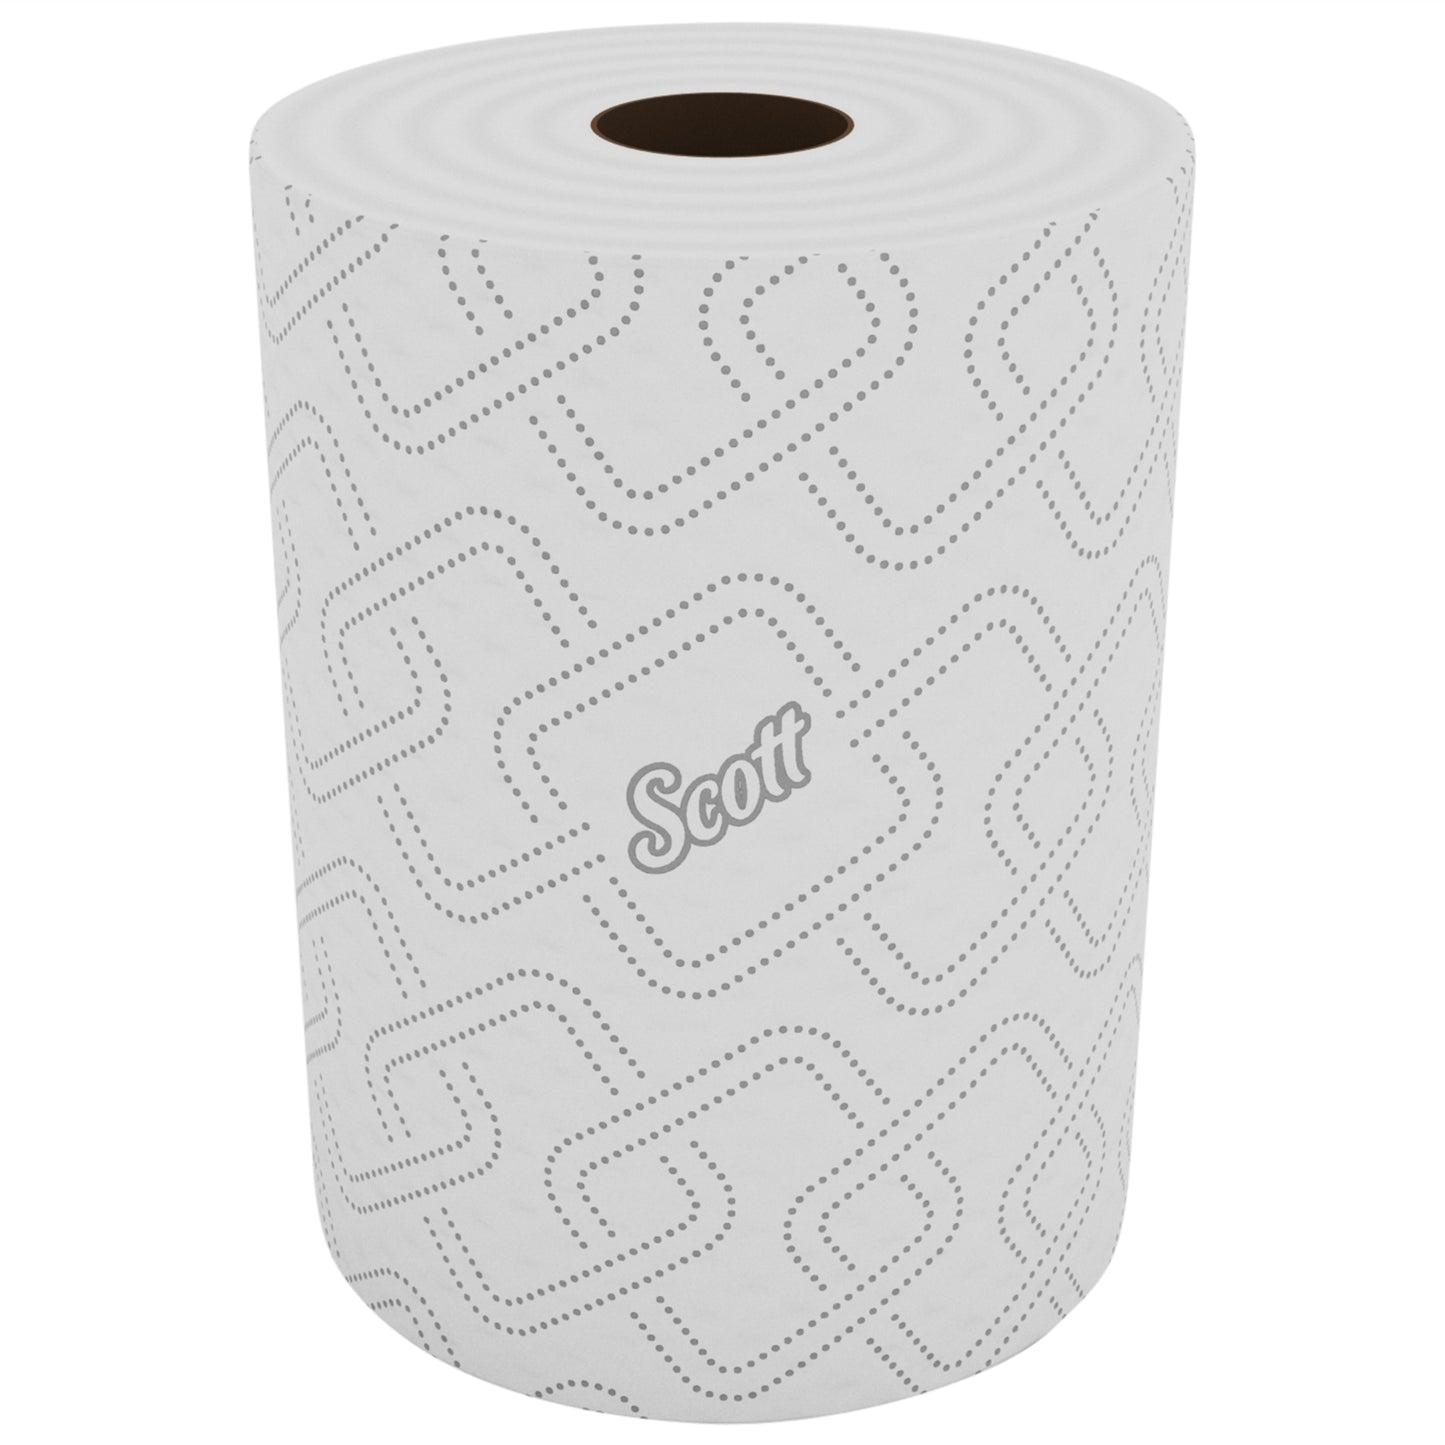 KIMBERLY-CLARK SCOTT CONTROL Rolled Hand Towel - 1 Ply (Pack of 6 Rolls) (Code 6565)